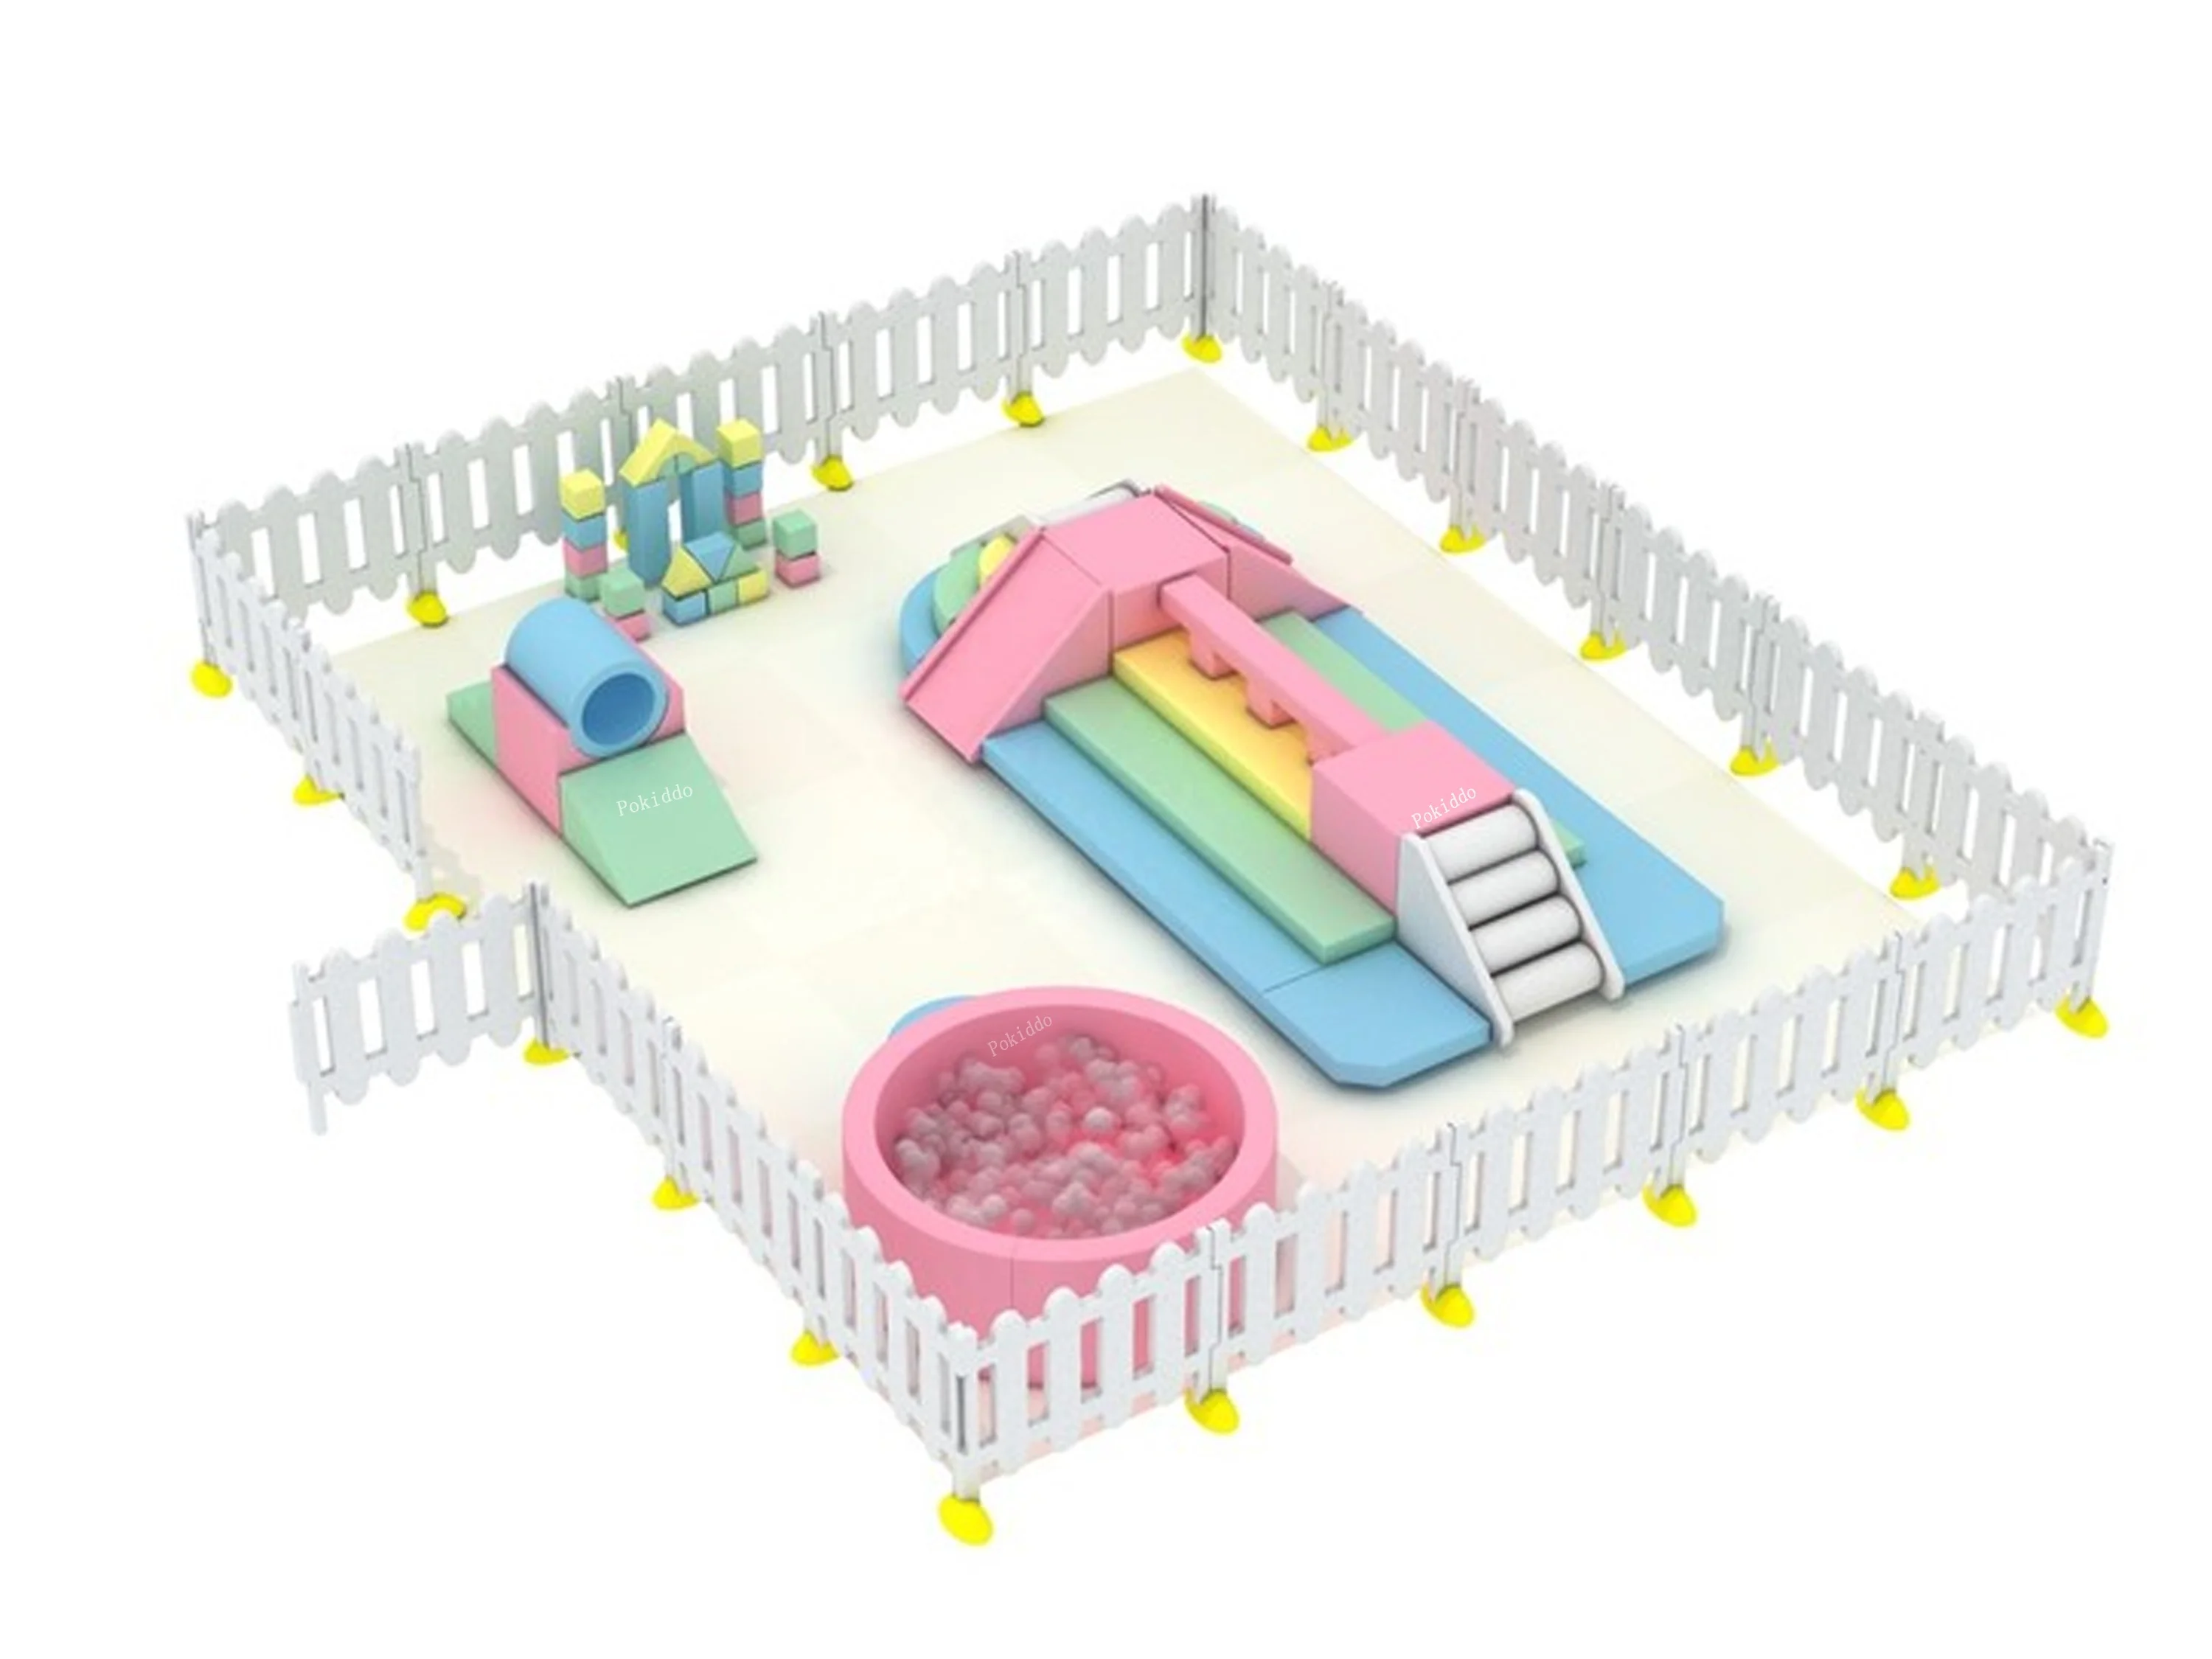 Preschool soft play equipment area for wholesale - Buy indoor soft play, soft  play equipment, wholesale kids soft play Product on Bettaplay Kids' Zone  Builder & Consultant